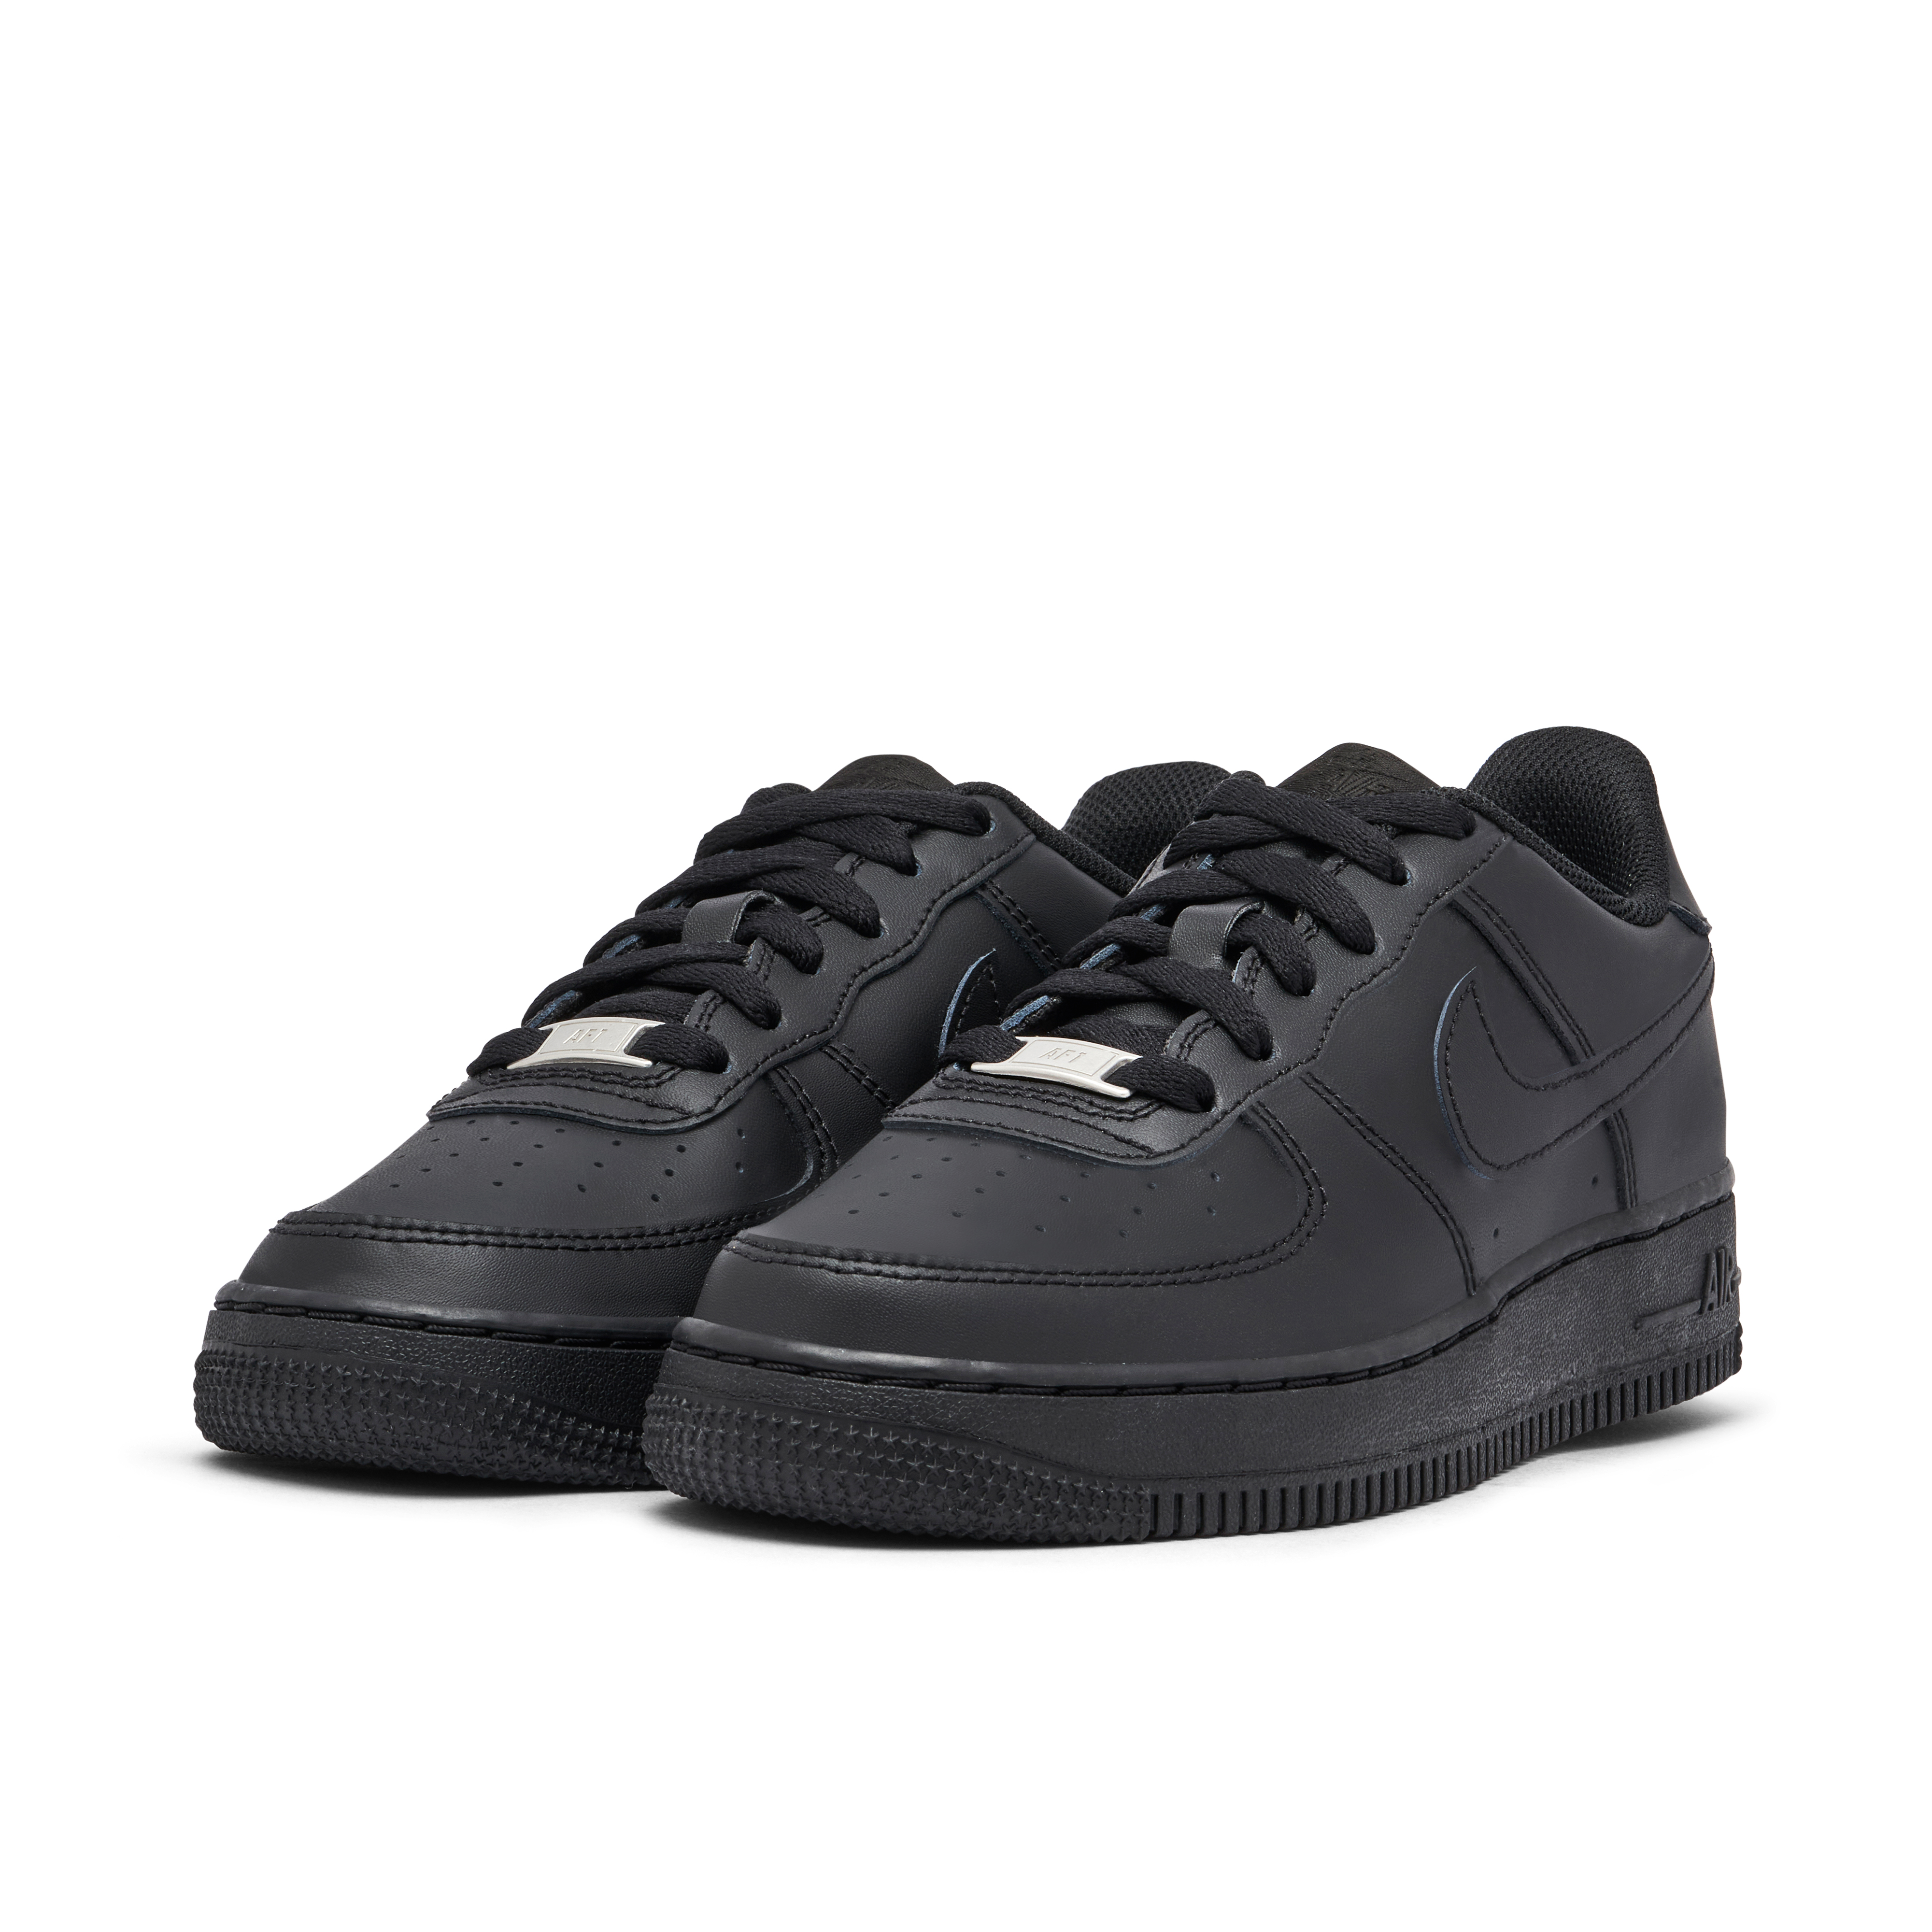 Nike Air Force 1 Low LE Black GS (2021) | DH2920-001 | Laced